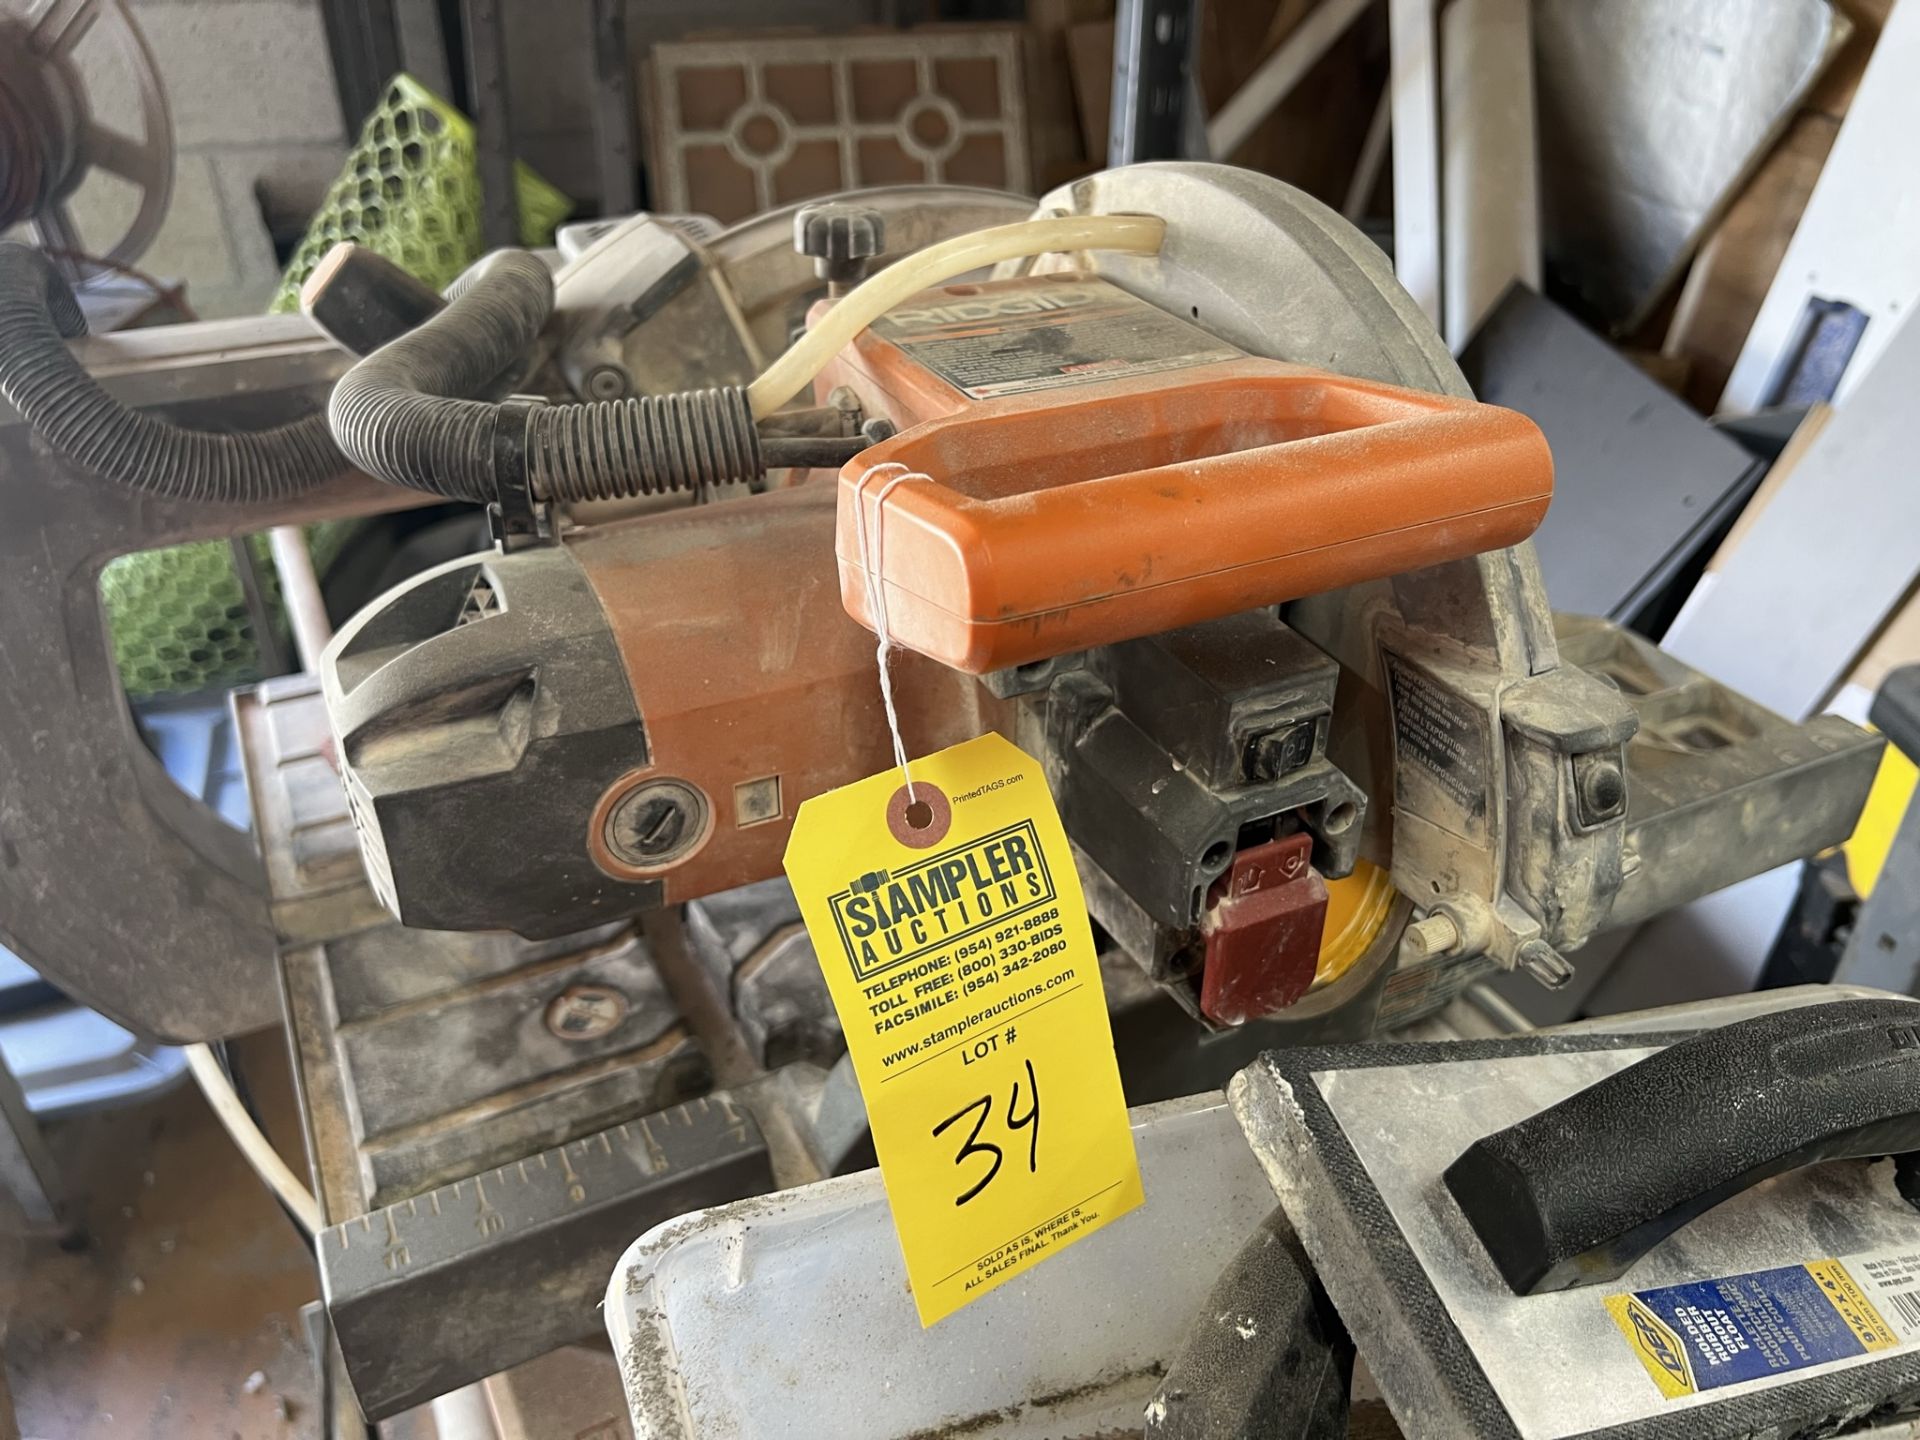 RIGID R4091 TILE SAW ON CART WITH TILE TOOLS - 10'' (LOCATED IN WEST PALM BEACH, FL)